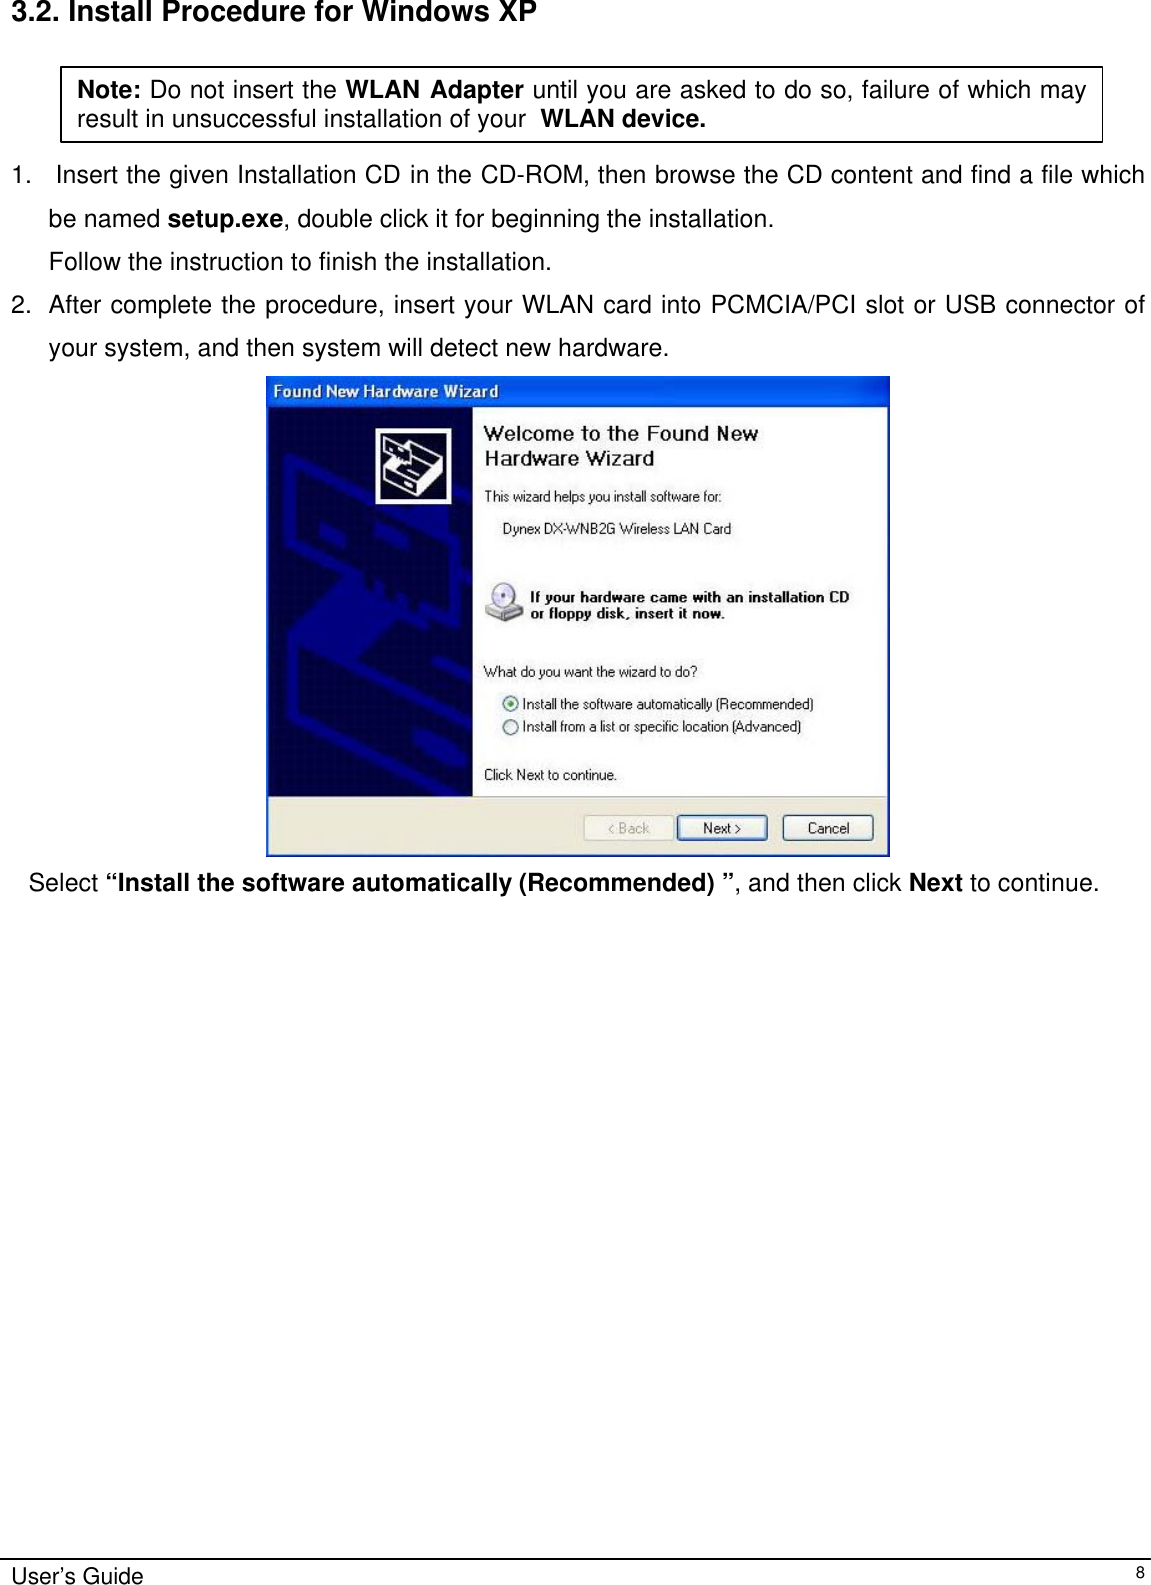                                                                                                                                                                              User’s Guide   8 3.2. Install Procedure for Windows XP  1.   Insert the given Installation CD in the CD-ROM, then browse the CD content and find a file which be named setup.exe, double click it for beginning the installation. Follow the instruction to finish the installation.  2. After complete the procedure, insert your WLAN card into PCMCIA/PCI slot or USB connector of your system, and then system will detect new hardware.     Select “Install the software automatically (Recommended) ”, and then click Next to continue.                          Note: Do not insert the WLAN Adapter until you are asked to do so, failure of which may result in unsuccessful installation of your  WLAN device. 